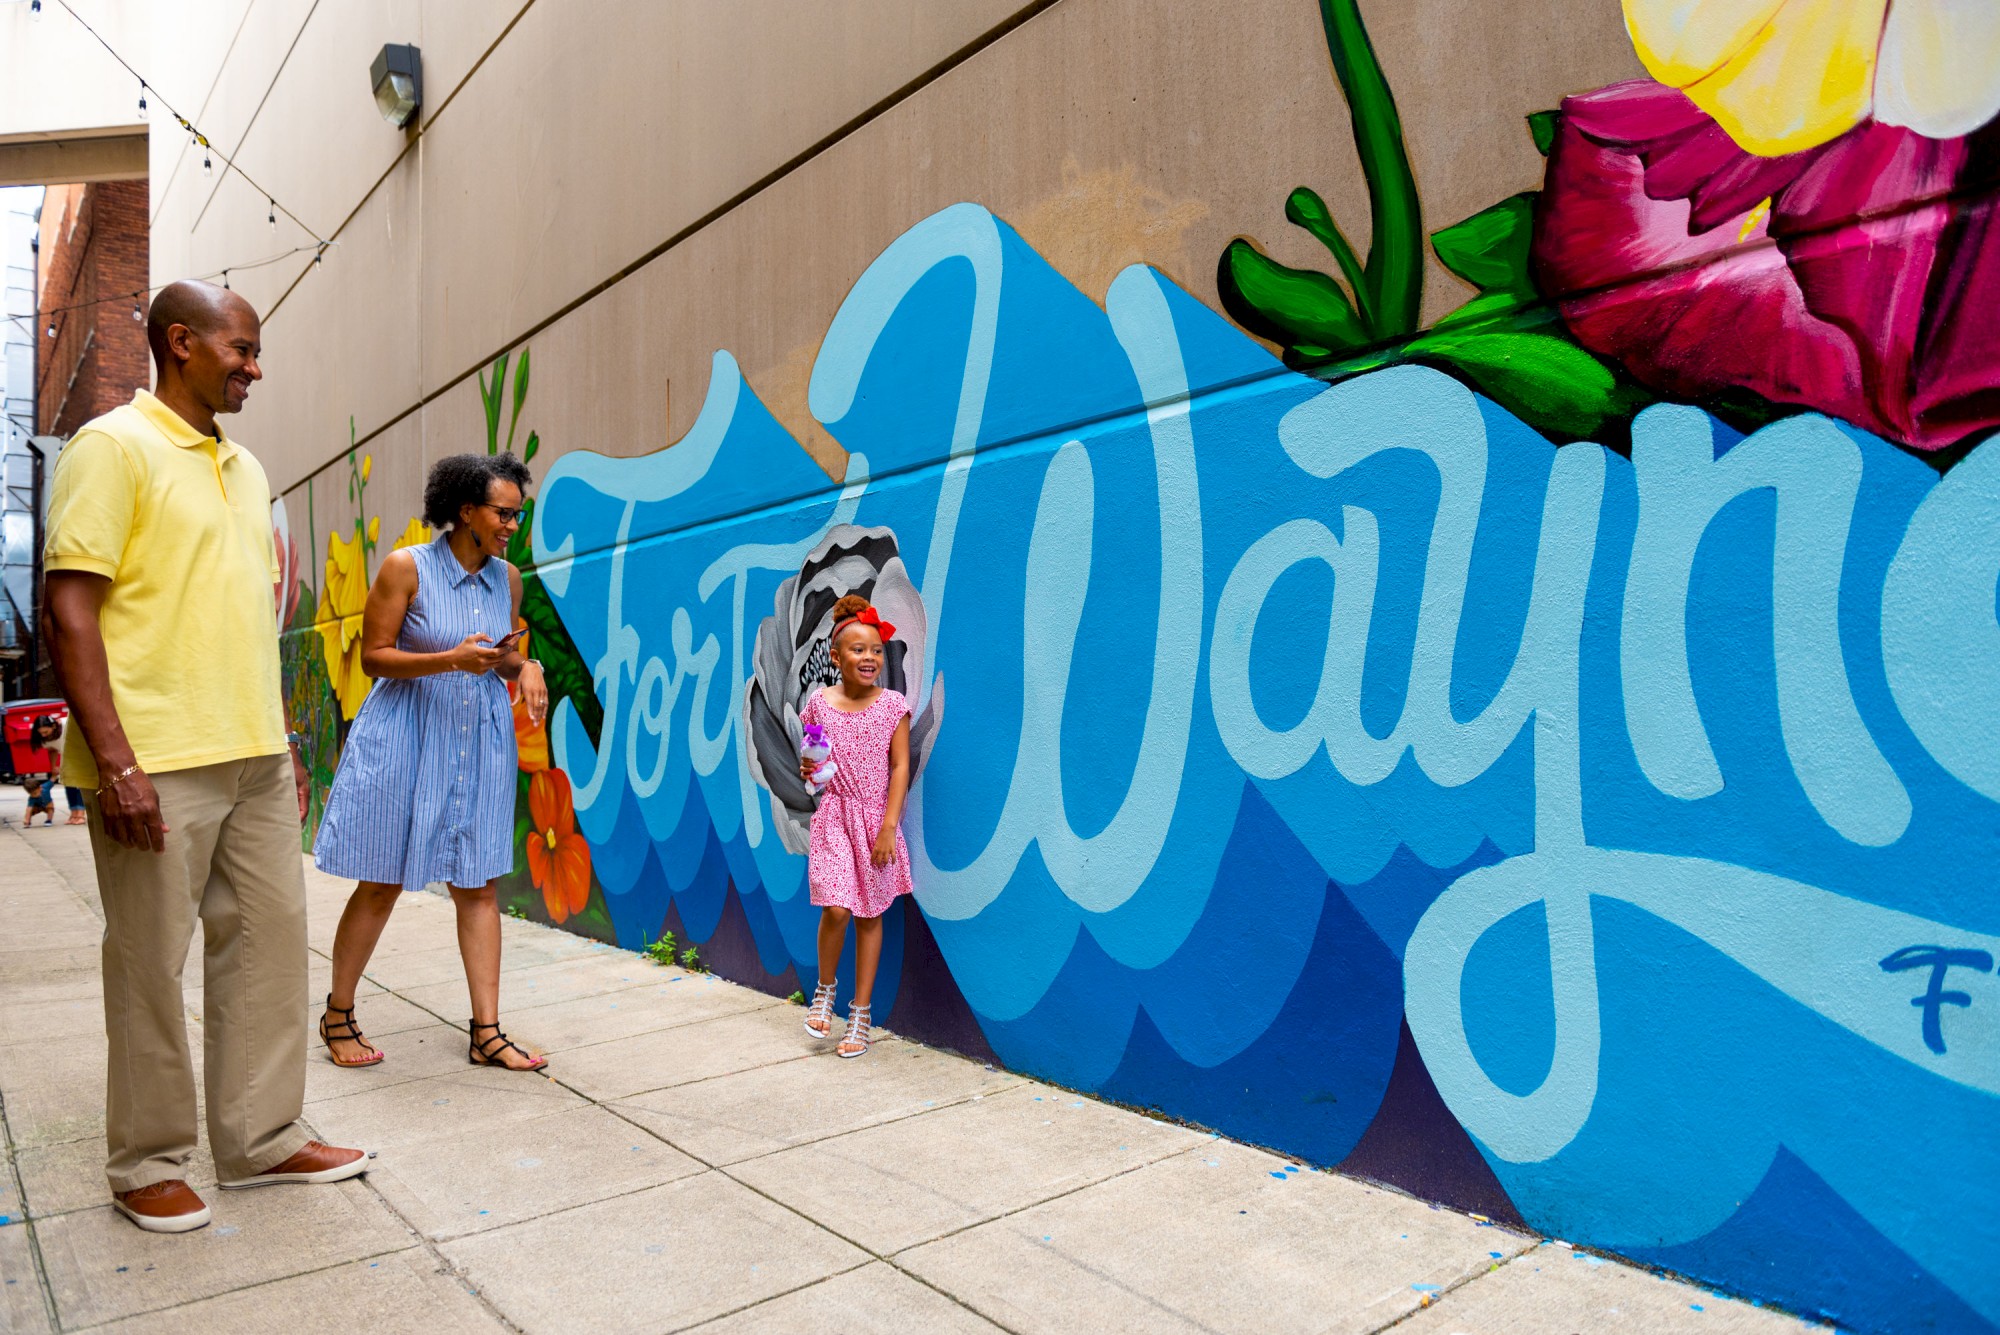 Three people admire a colorful mural that says 